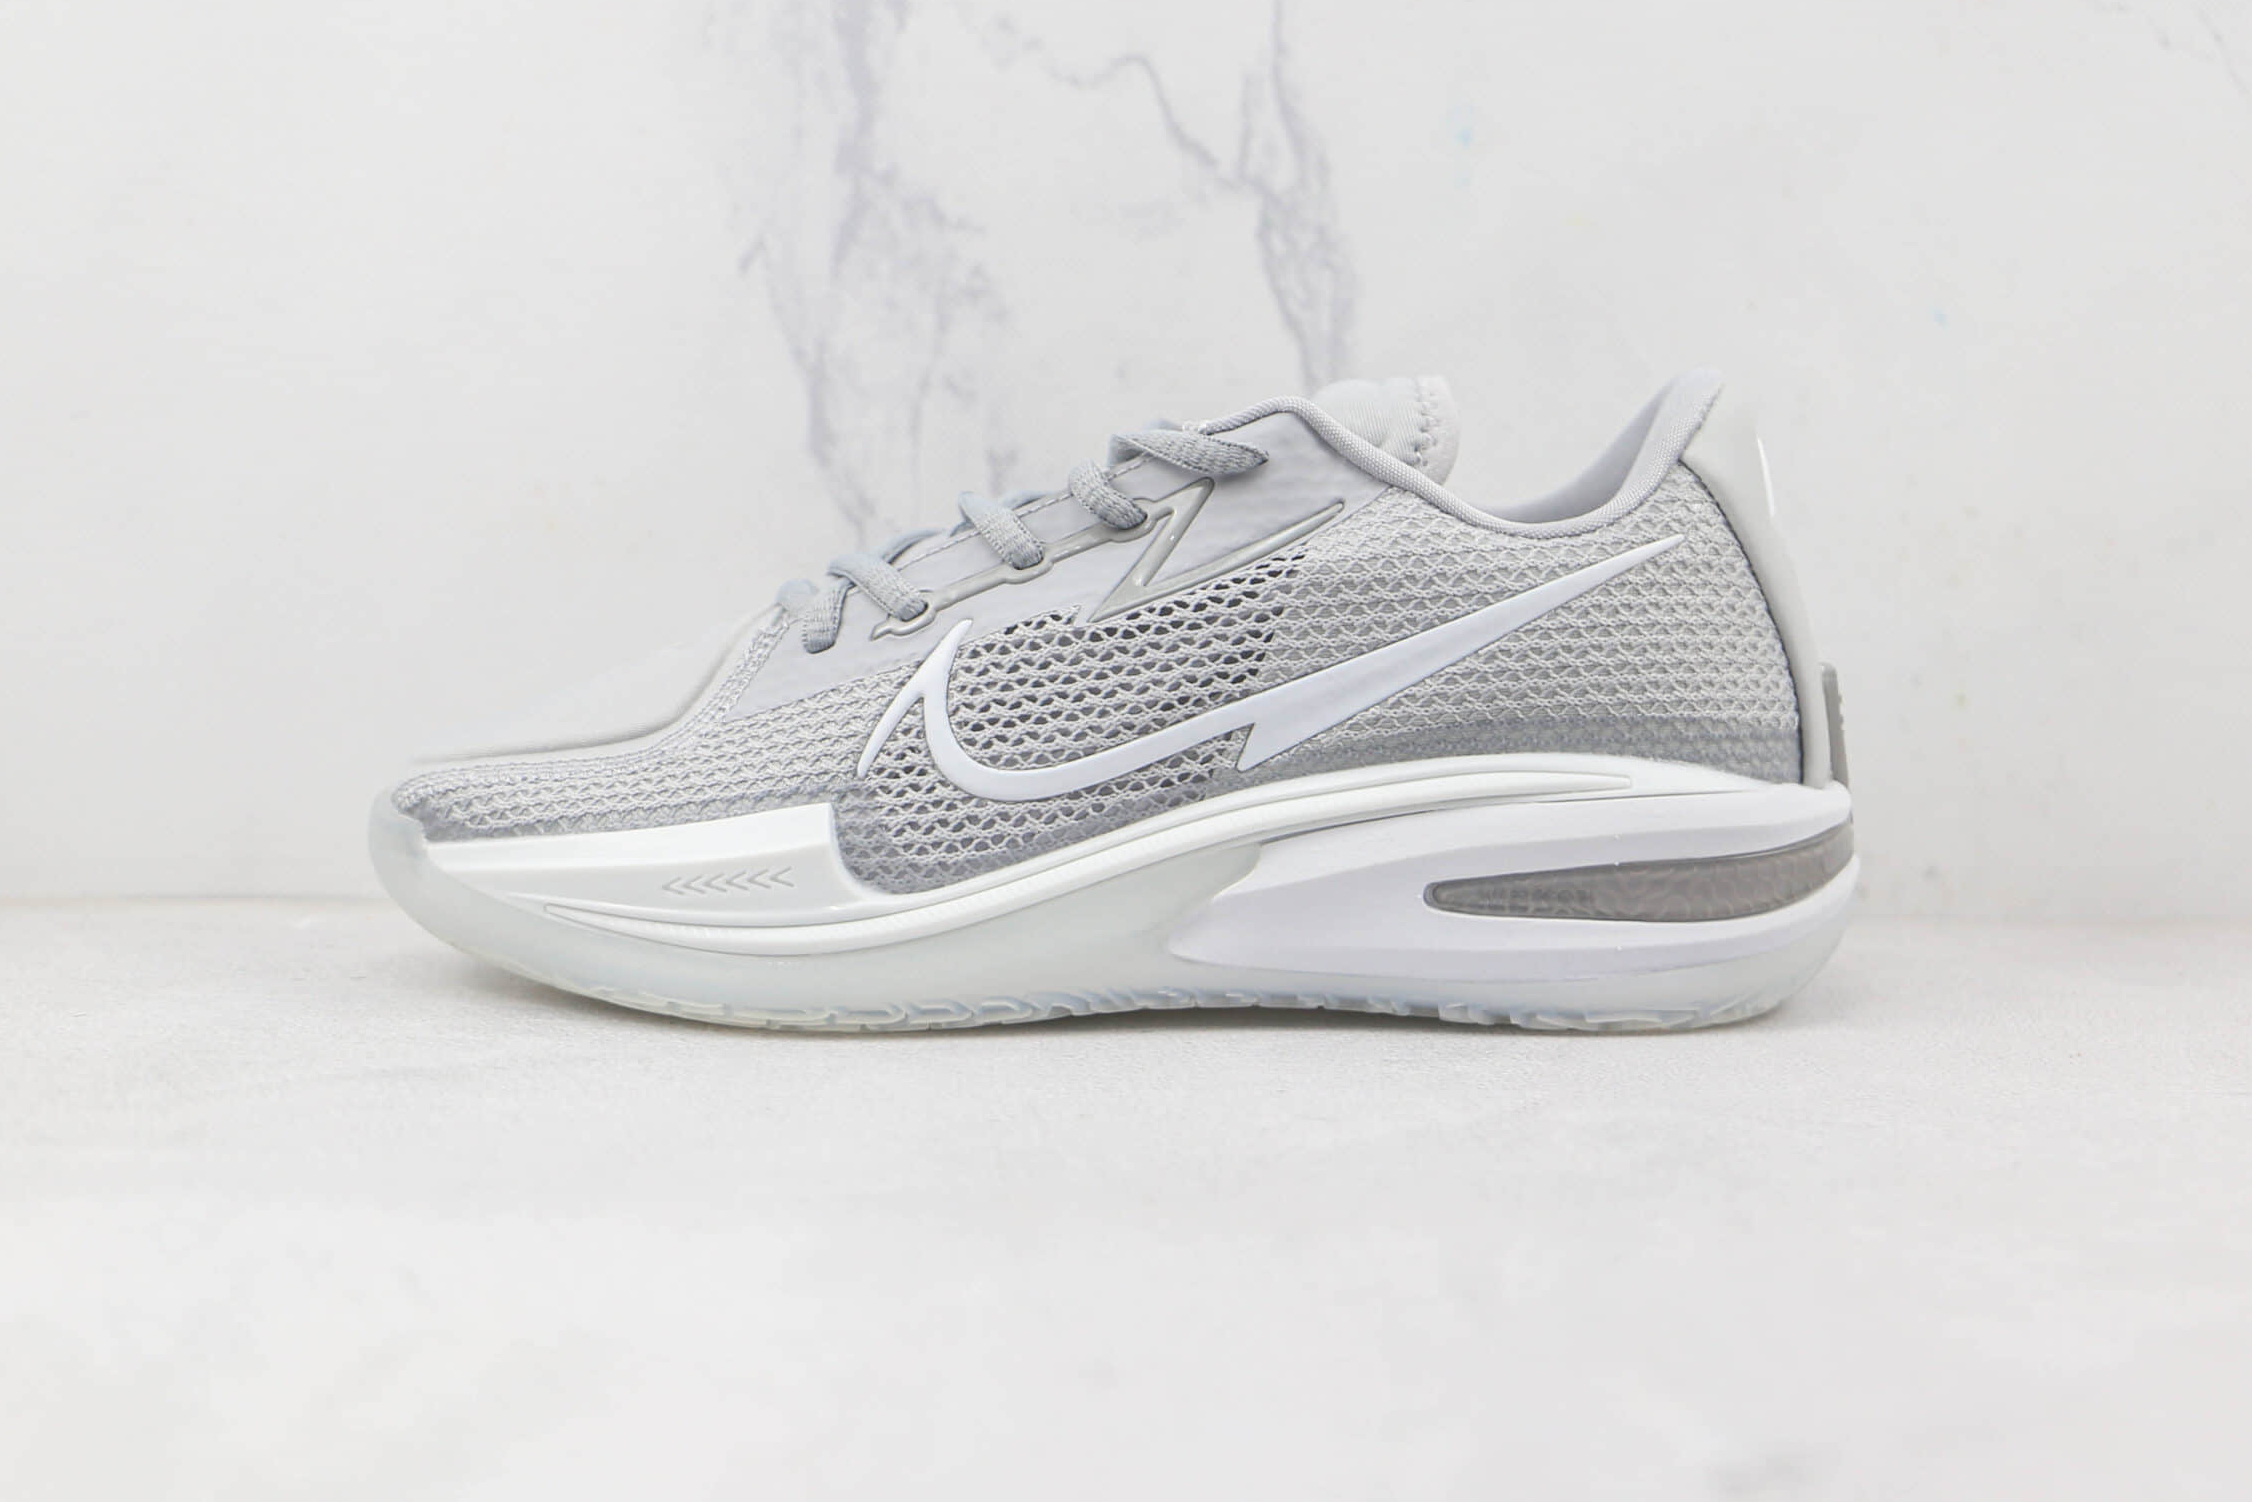 Nike Air Zoom GT Cut EP Light Grey White Shoes CZ0175-007 | Men's Basketball Sneakers